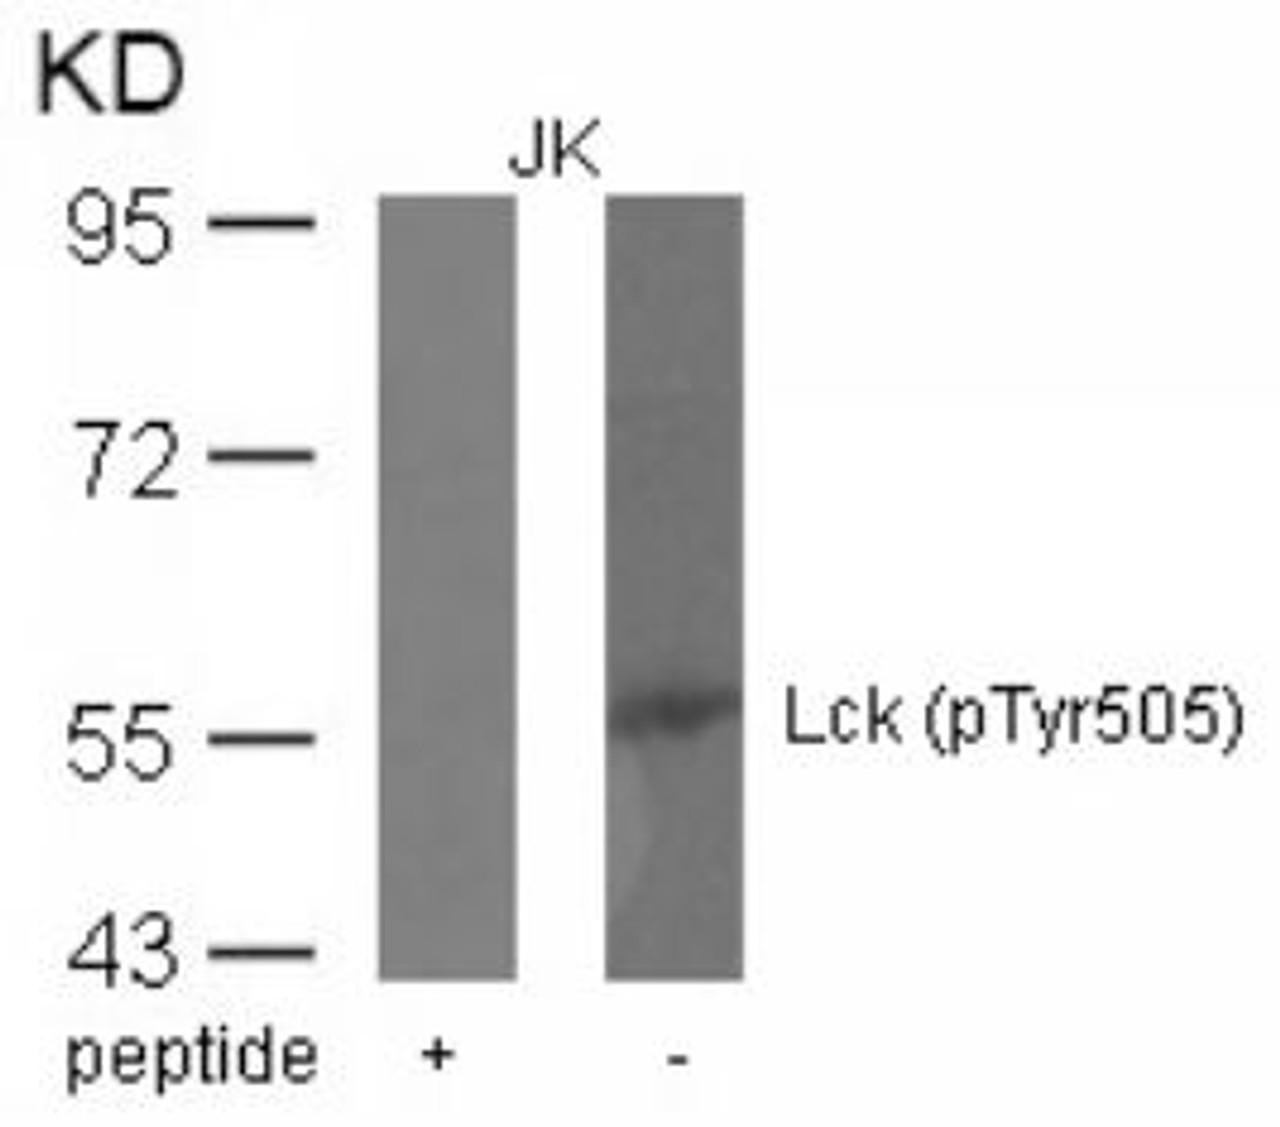 Western blot analysis of lysed extracts from JK cells using Lck (phospho-Tyr505) .